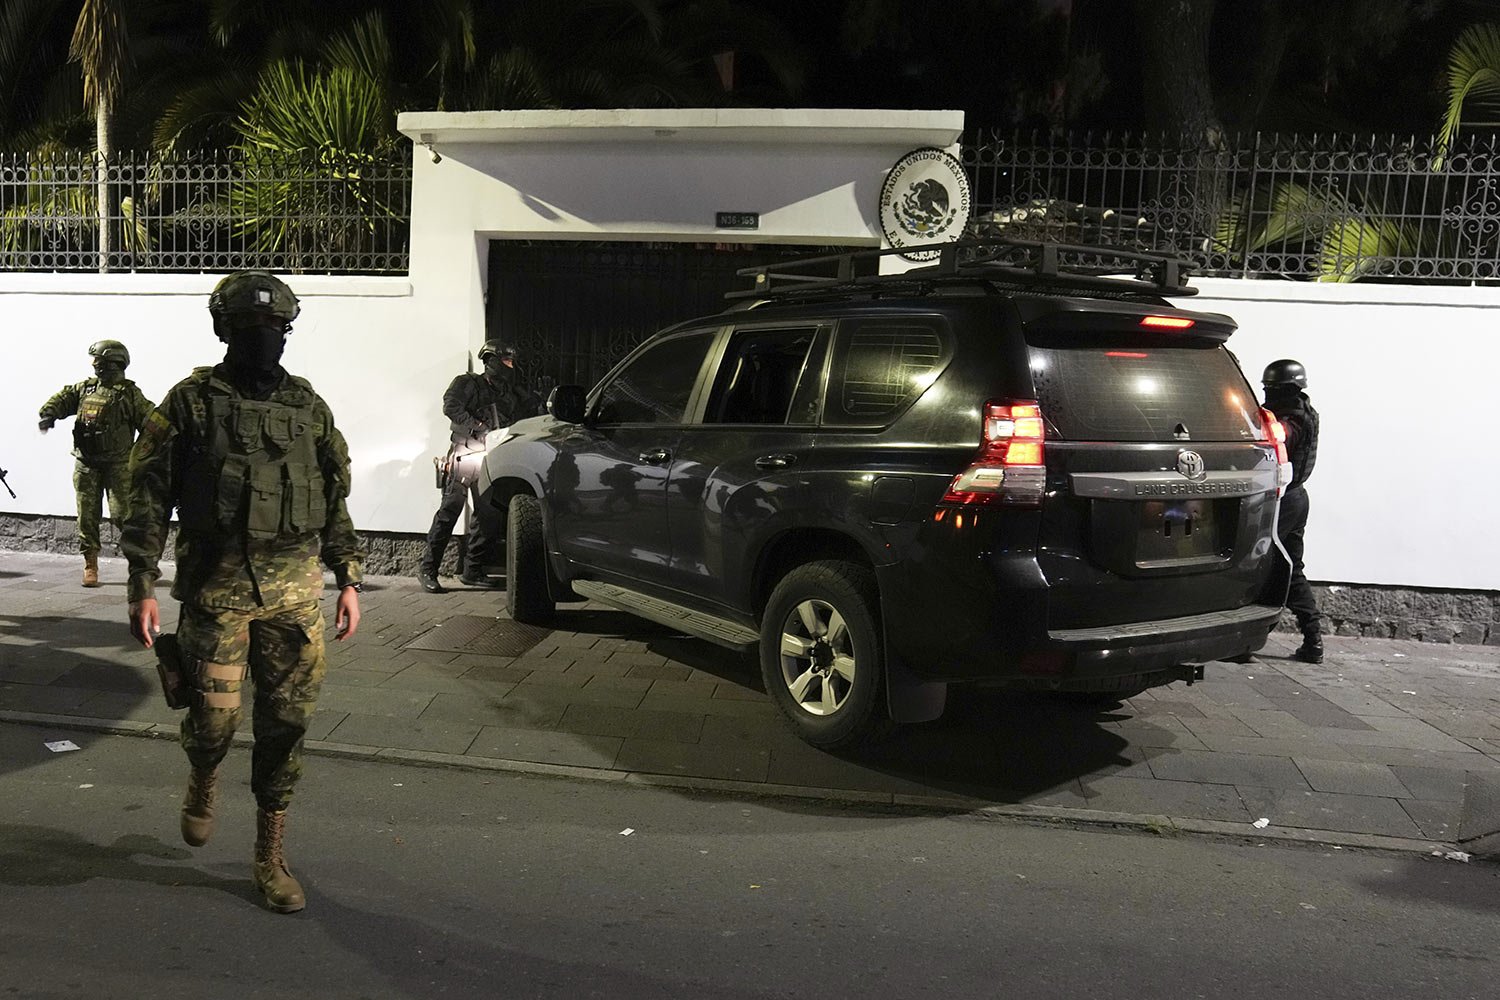  Police attempt to break into the Mexican embassy in Quito, Ecuador, April 5, 2024, following Mexico's granting of asylum to former Ecuadorian Vice President Jorge Glas, who had sought refuge here. Police later forcibly broke into the embassy through